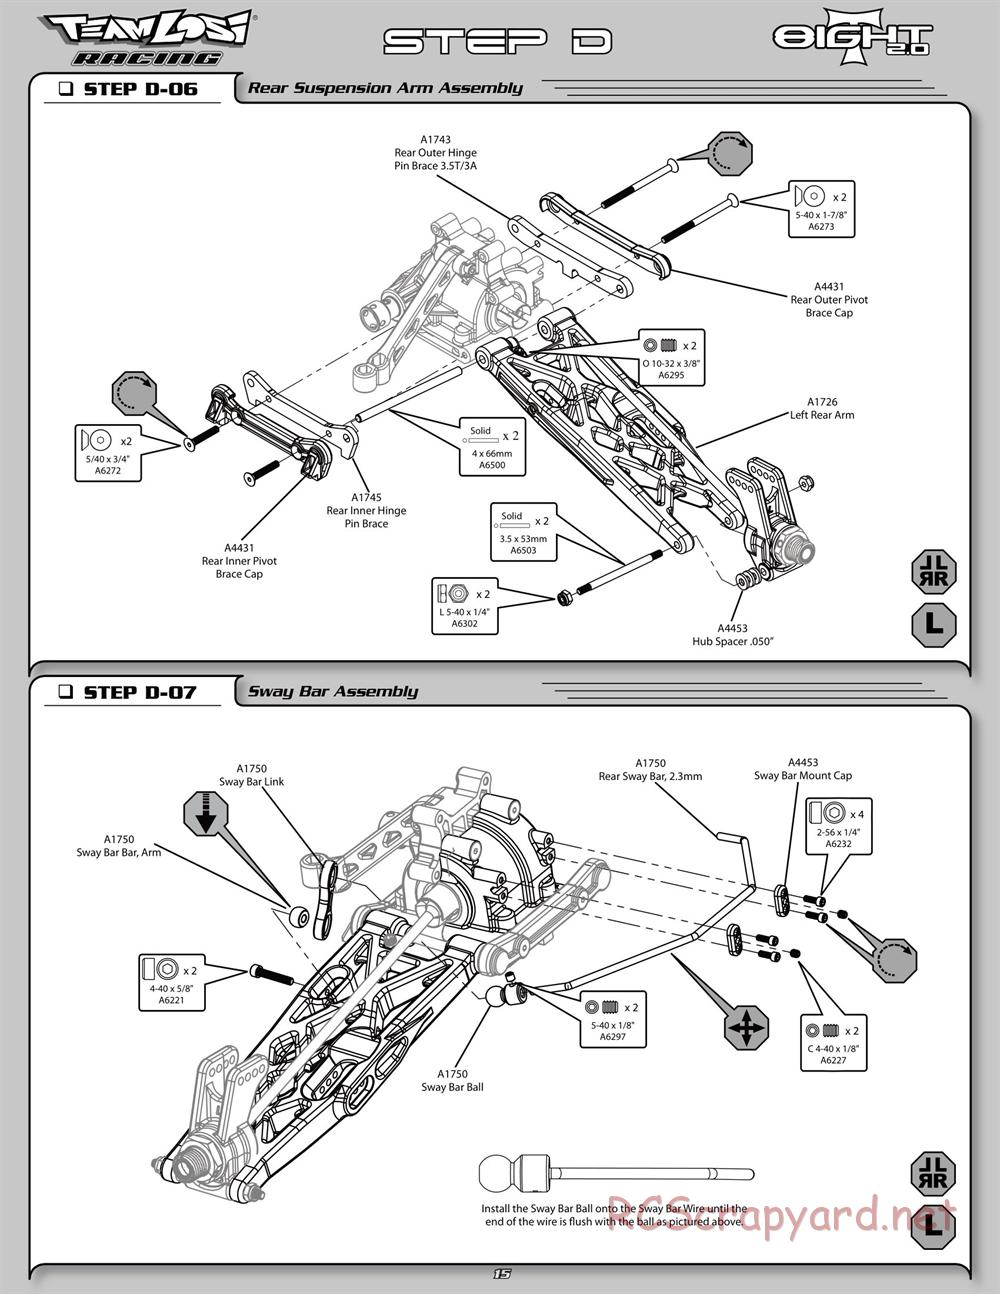 Team Losi - 8ight-T 2.0 Race Roller - Manual - Page 20